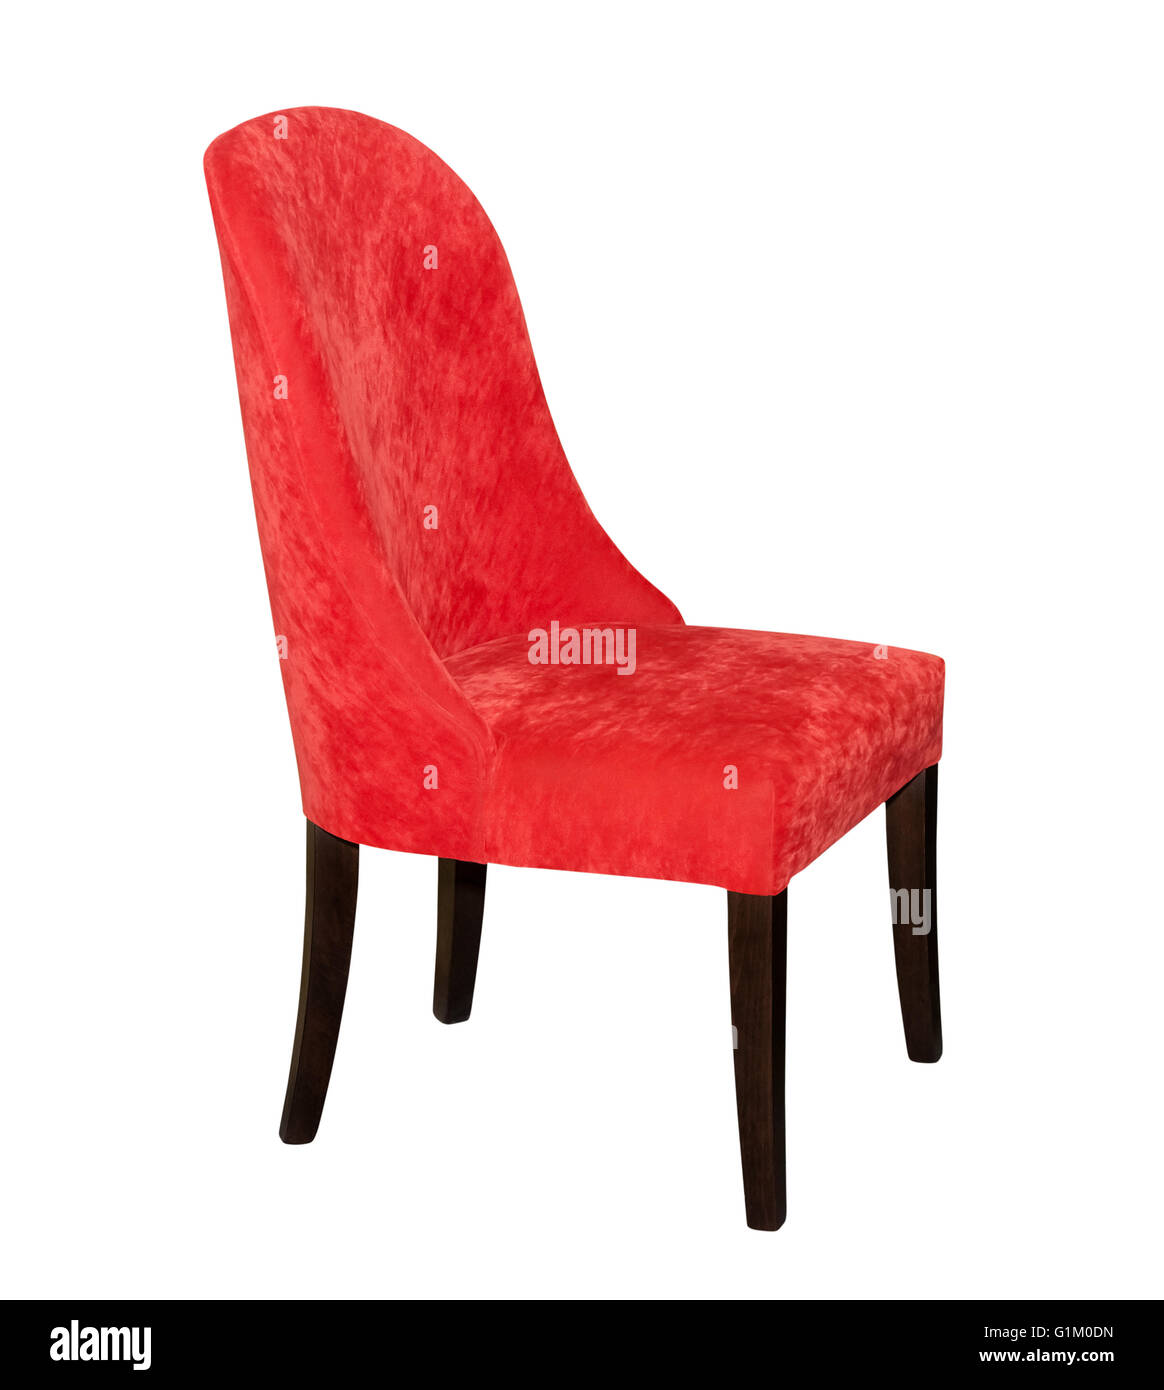 Red textile modern chair isolated Stock Photo